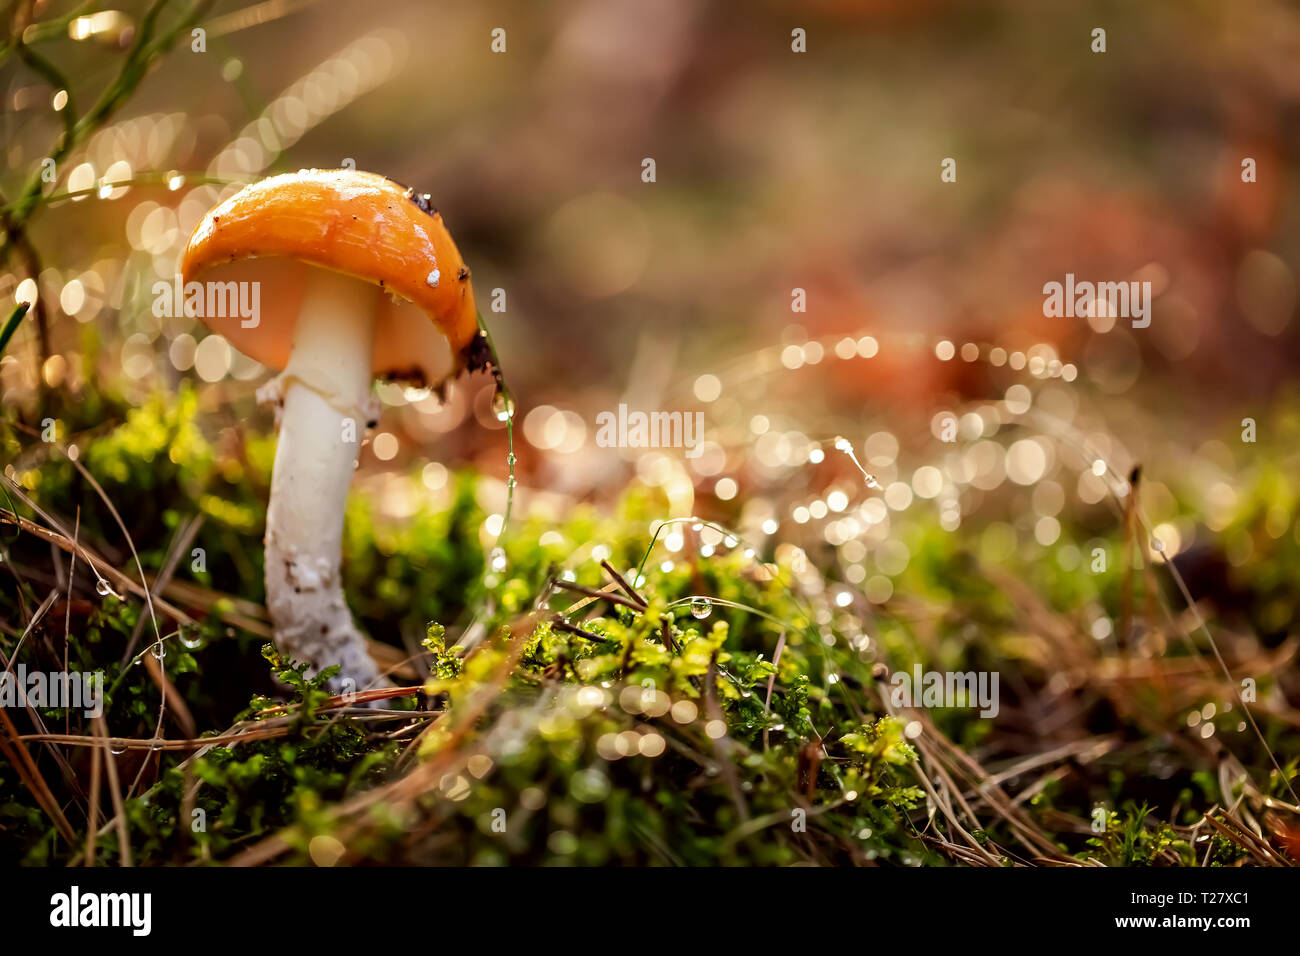 Fly agaric Mushroom In a Sunny forest in the rain. Amanita muscaria, commonly known as the fly agaric or fly amanita, is a basidiomycete mushroom, one Stock Photo